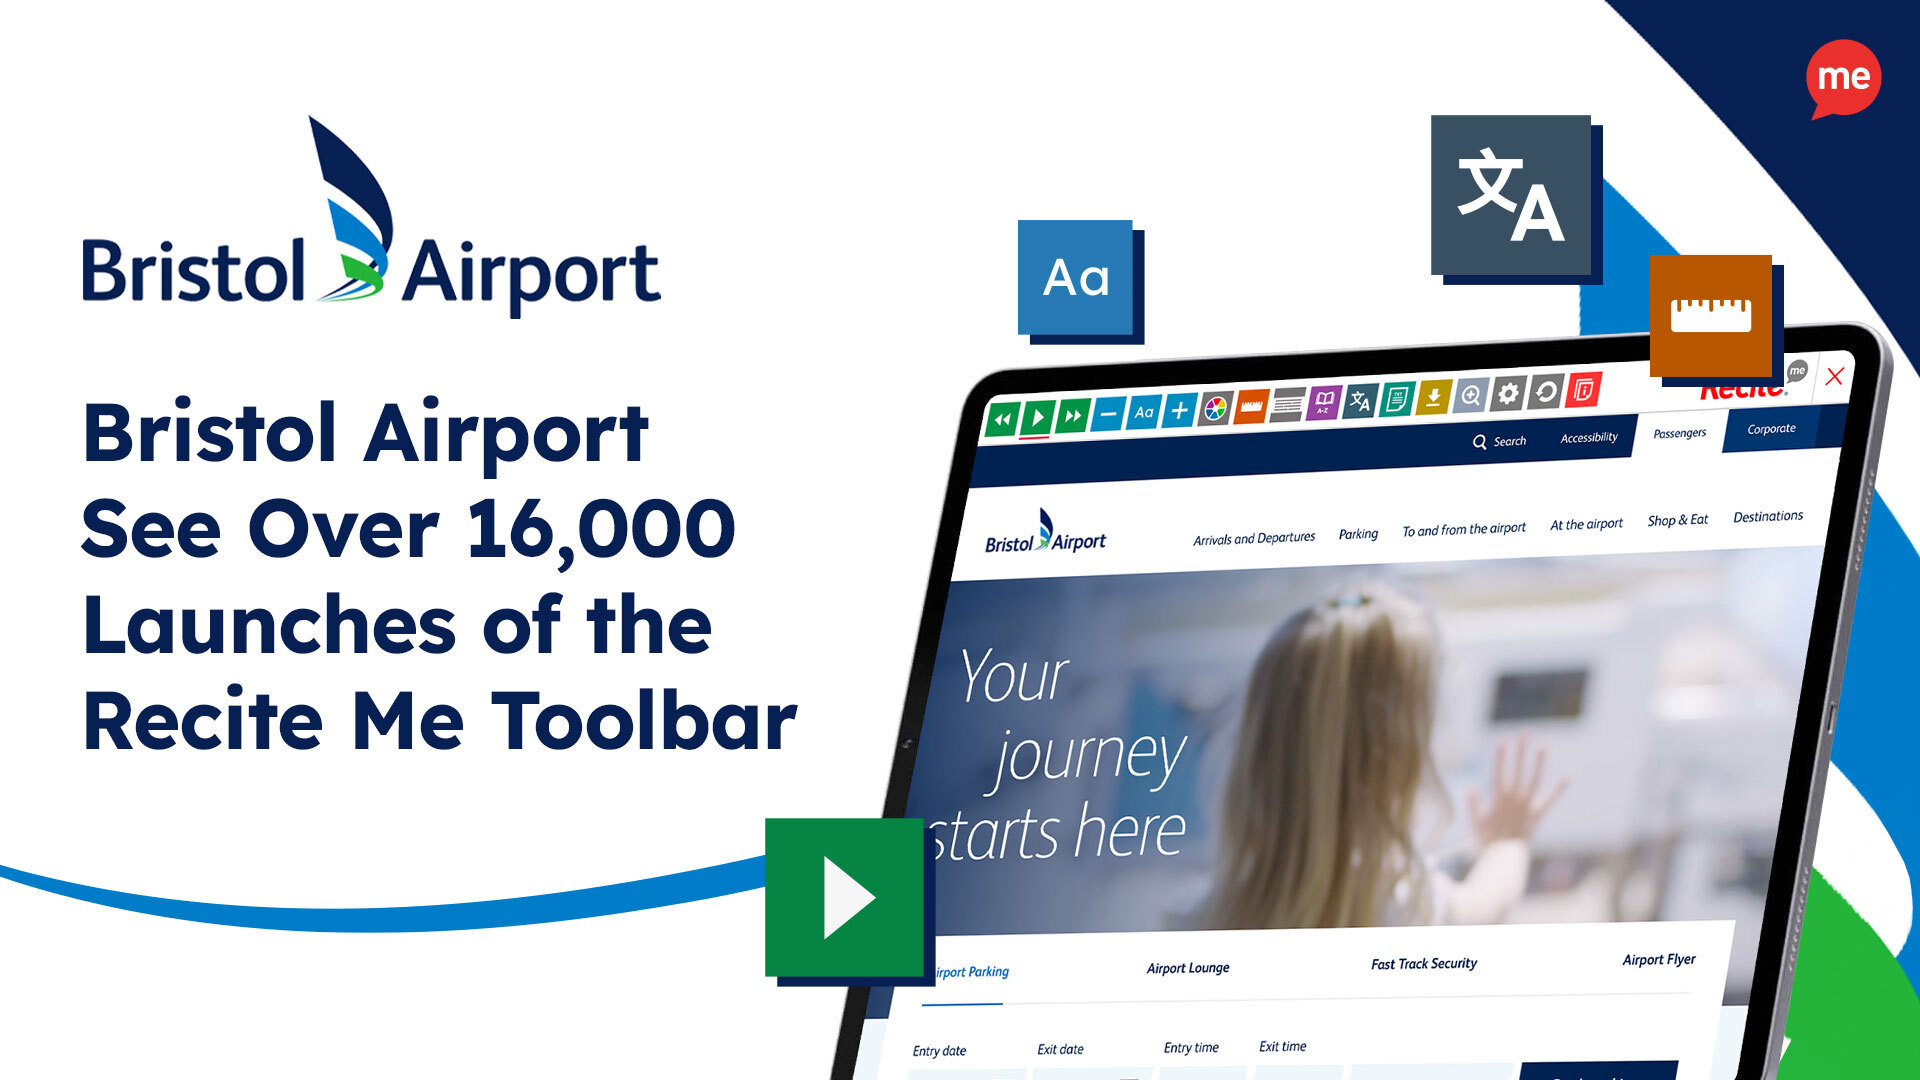 Bristol Airport See Over 16,000 Launches of the Recite Me Toolbar. Mock-up of the toolbar being used on the Bristol Airport website